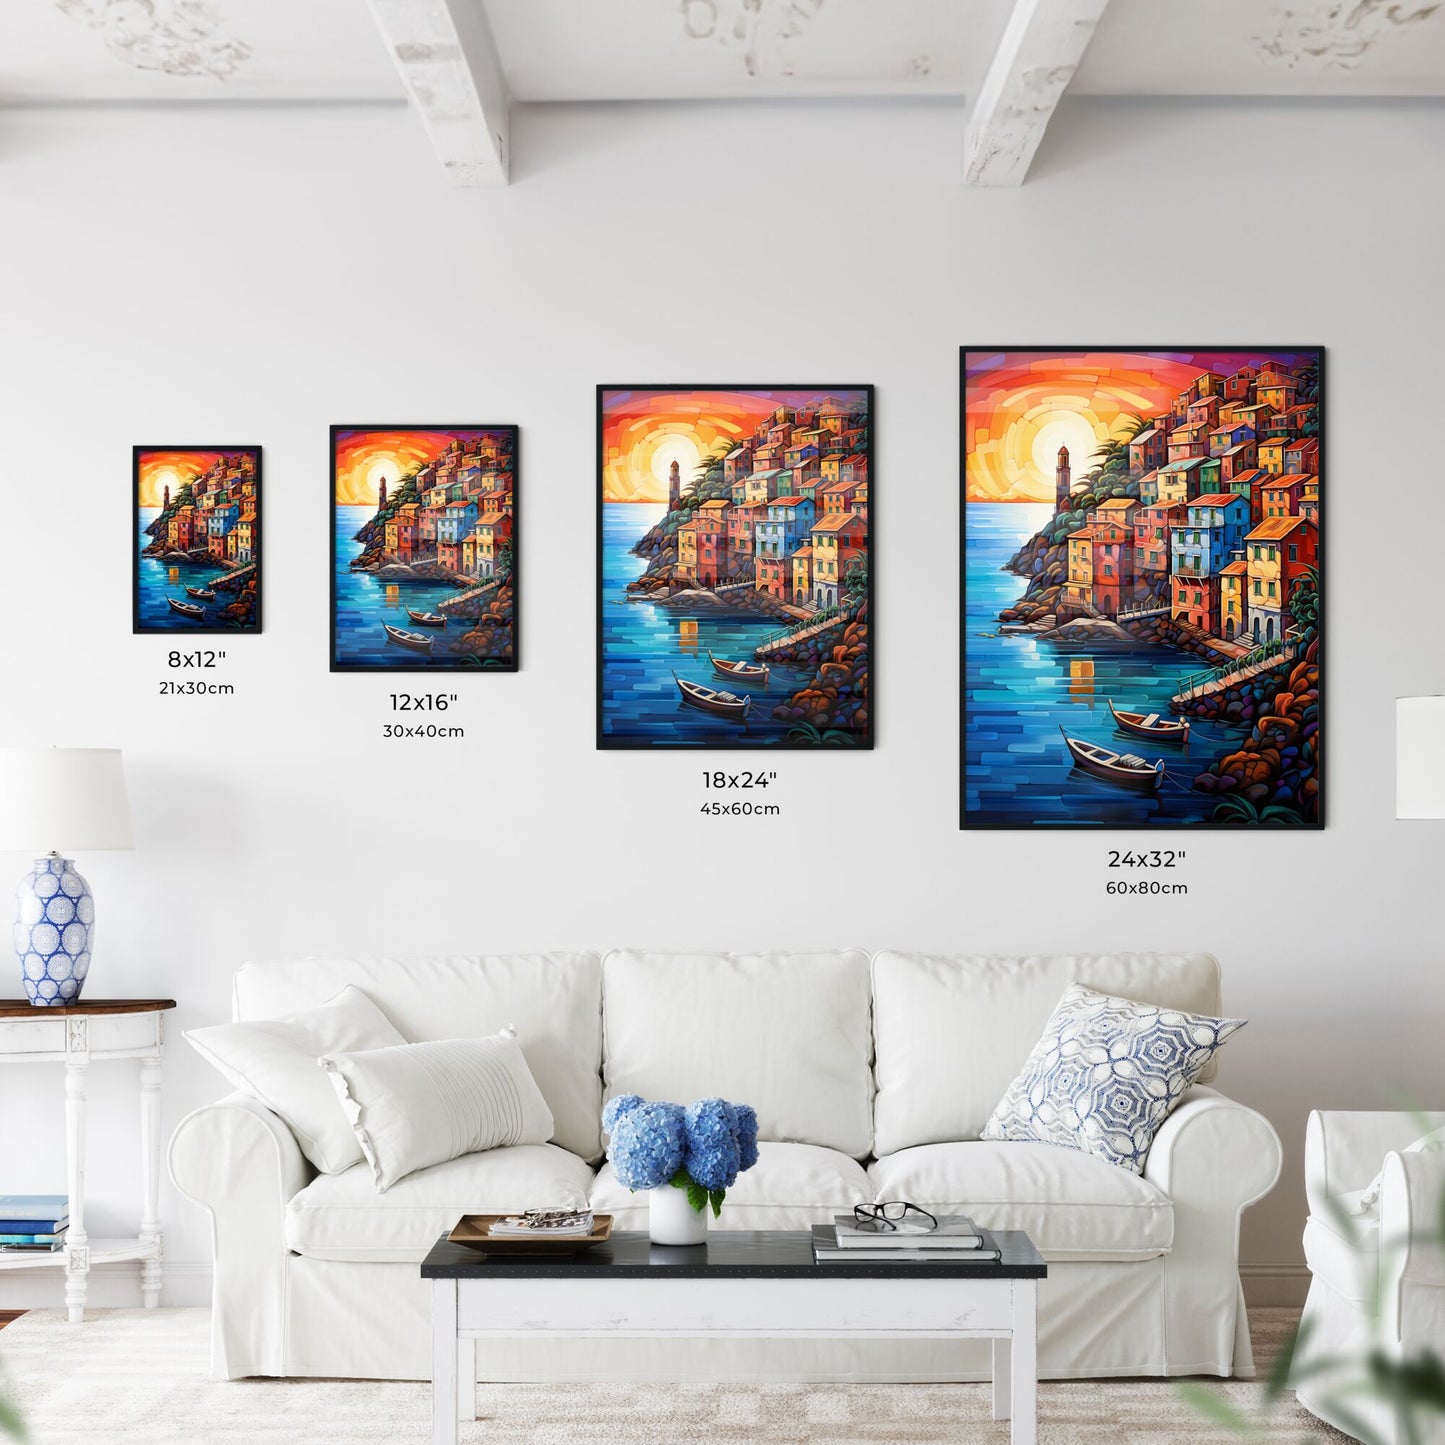 Painting Of A Colorful Town On A Hill With Boats On The Water Art Print Default Title